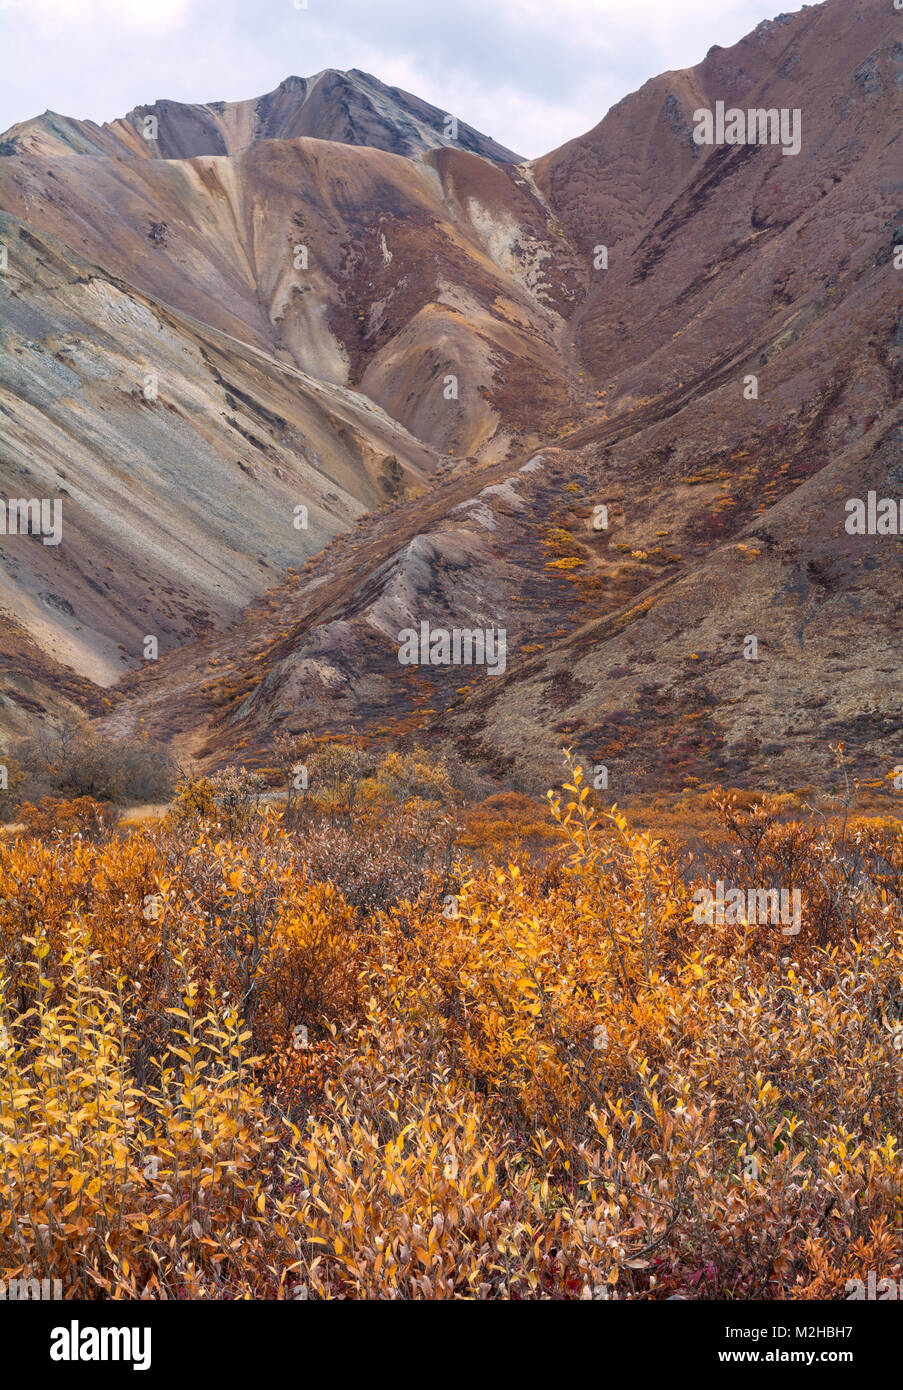 Erosion has slid gravel to cover the steep slopes of a ravine with brush in autumn colors struggling to maintain a foothold. Stock Photo